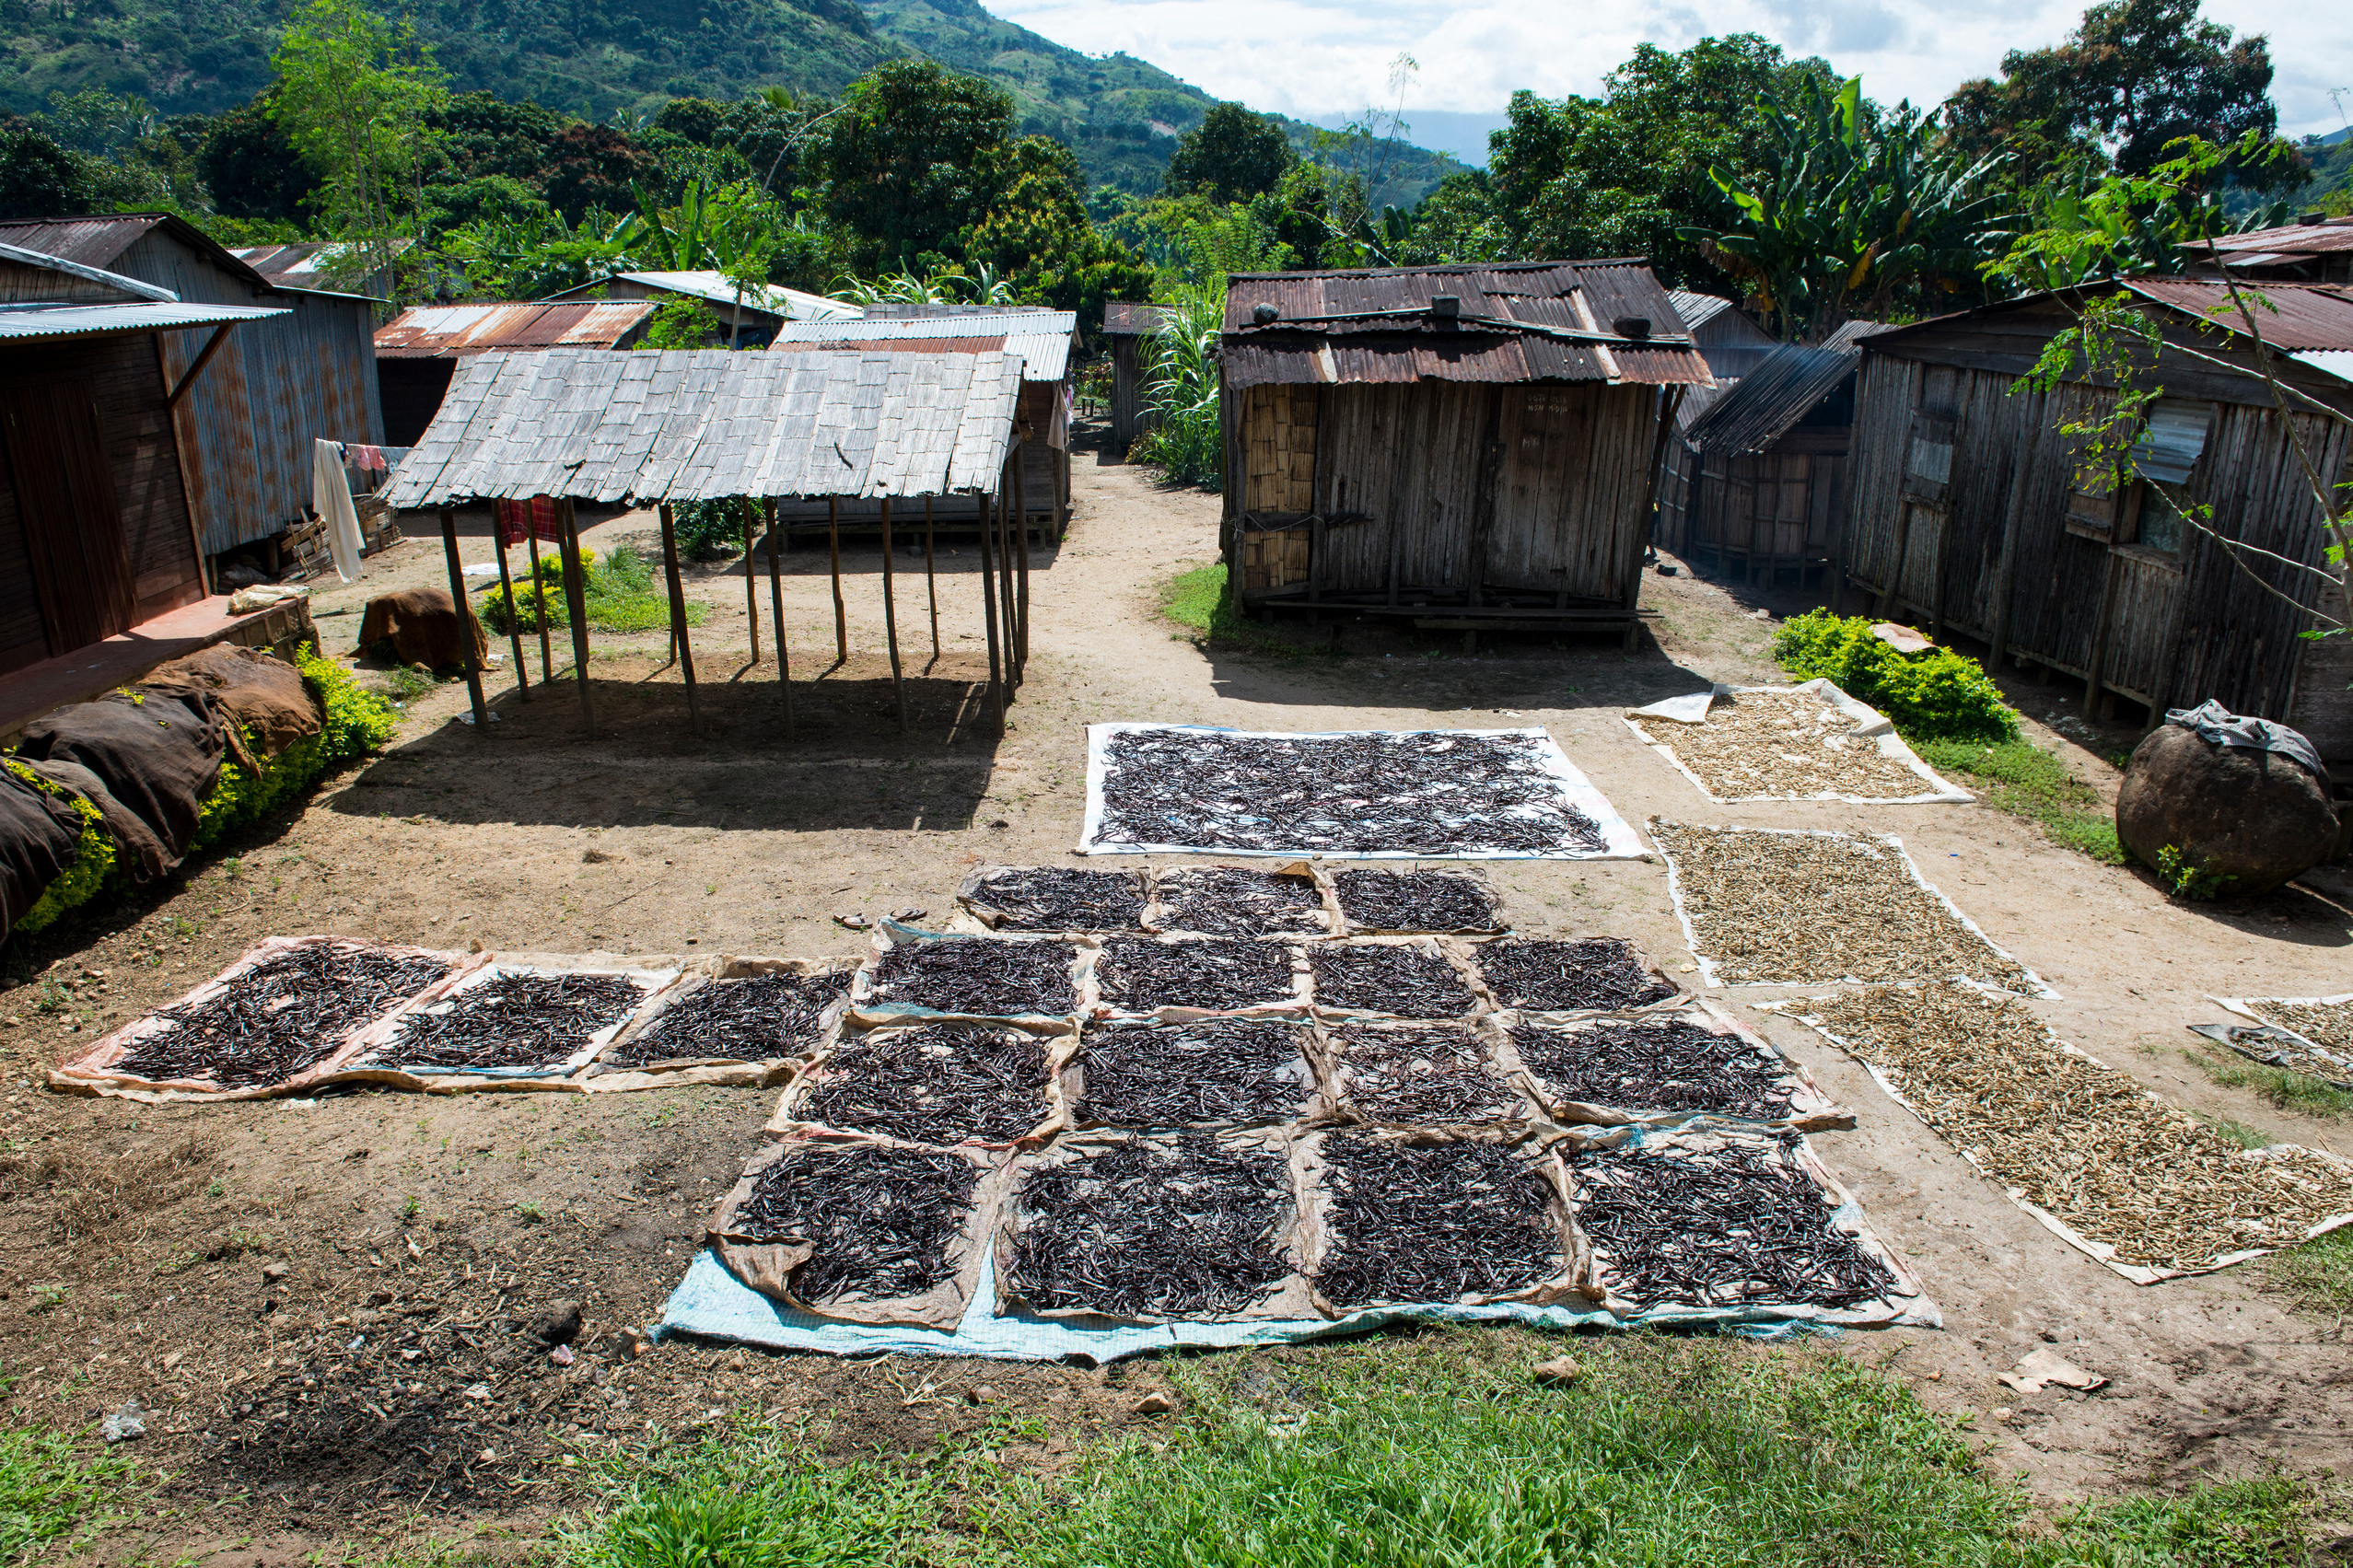 Vanilla beans lie on tarpaulins to dry in the sun in a village.